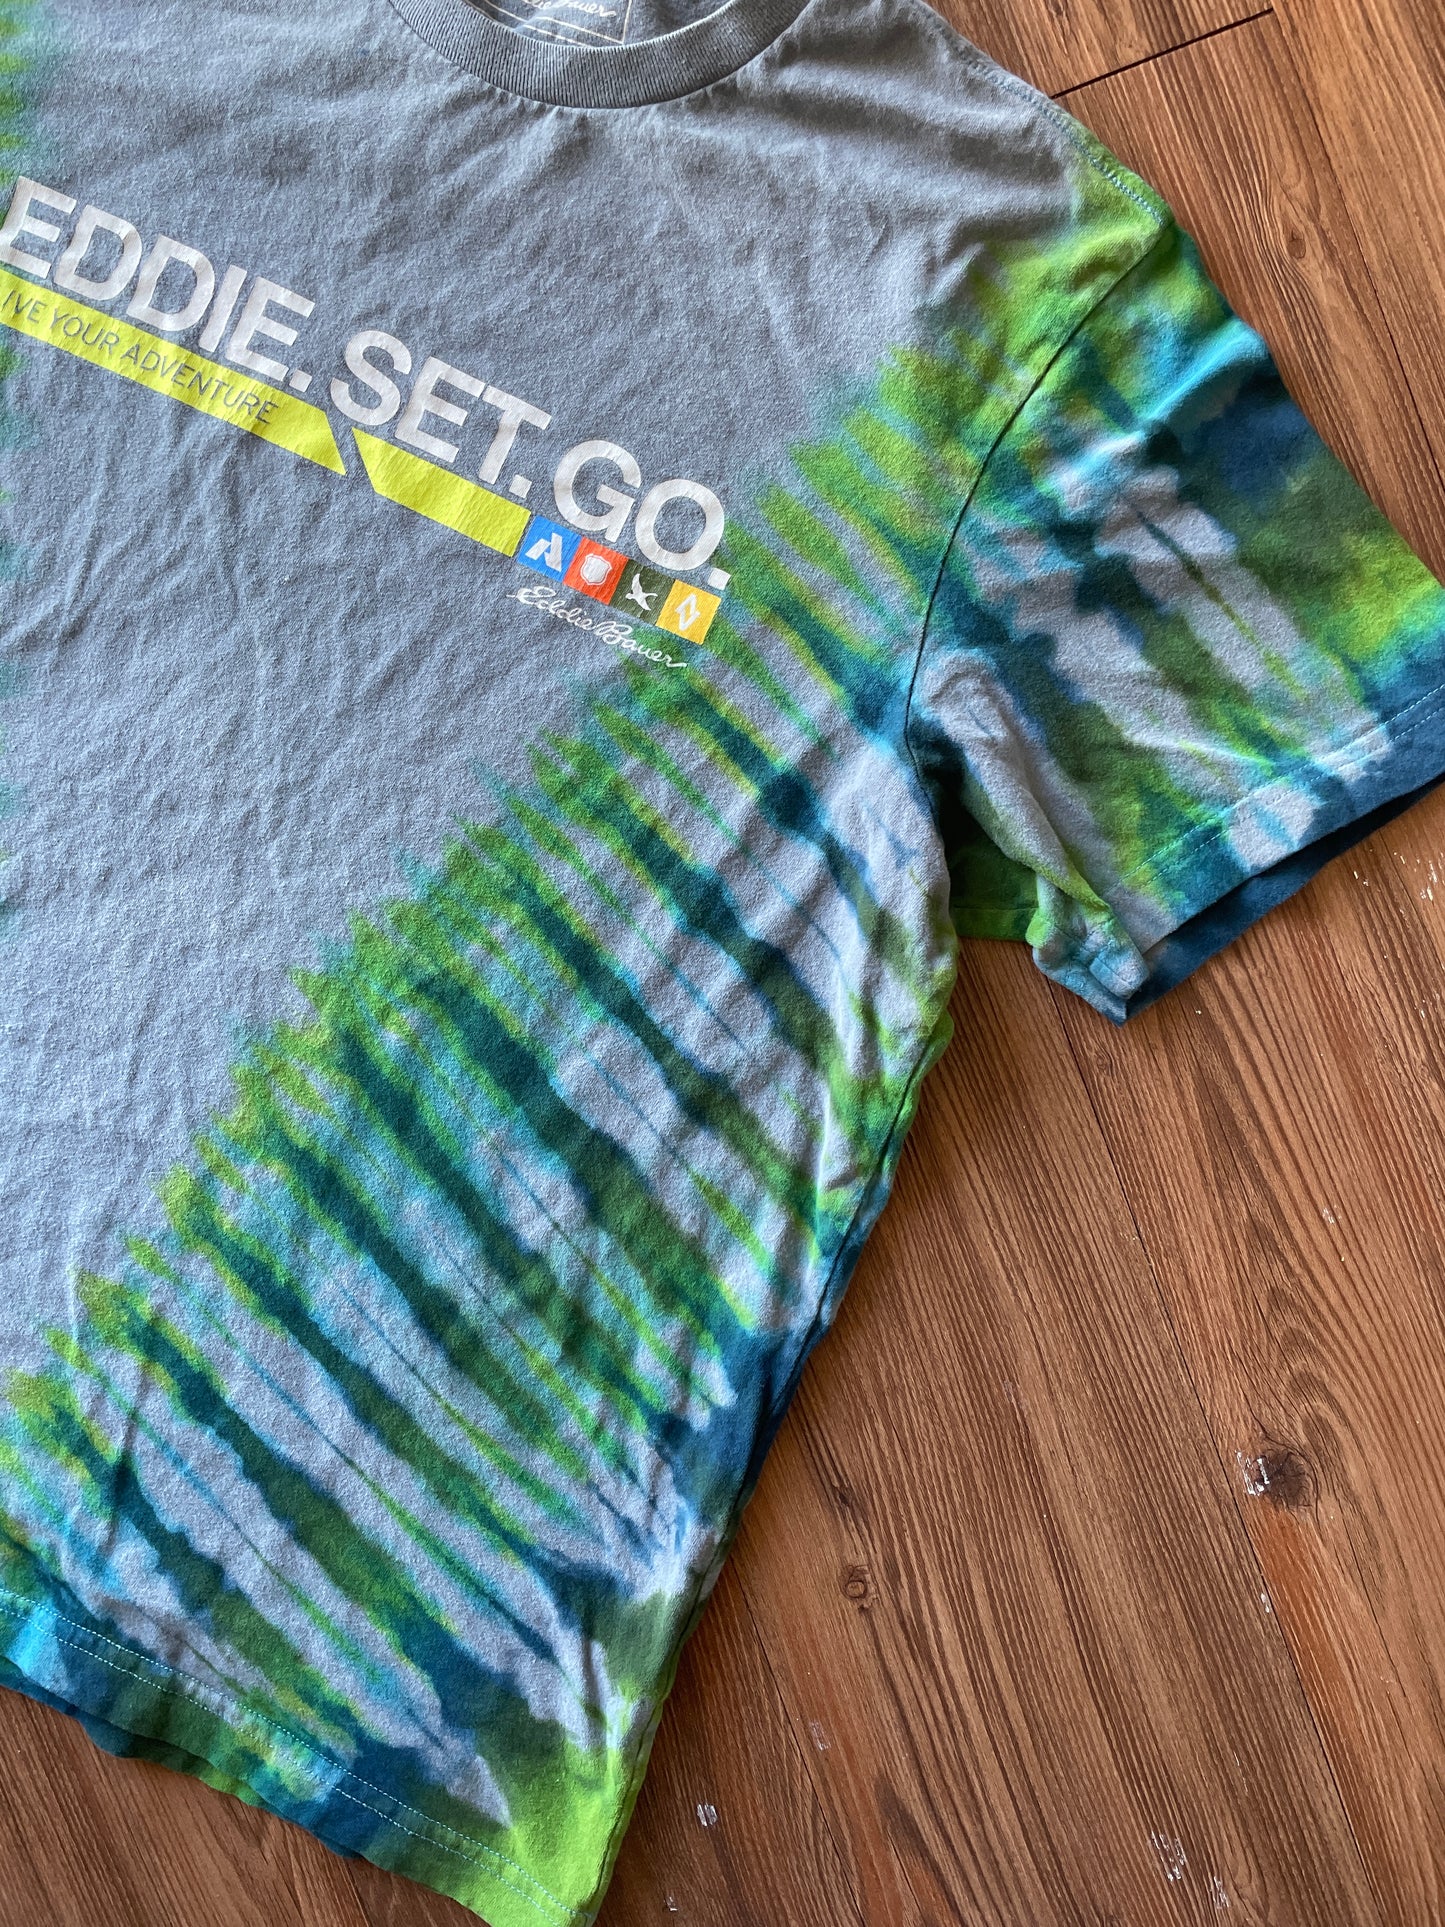 LARGE Men’s Eddie Bauer Handmade Tie Dye T-Shirt | One-Of-a-Kind Gray, Blue, and Green Short Sleeve